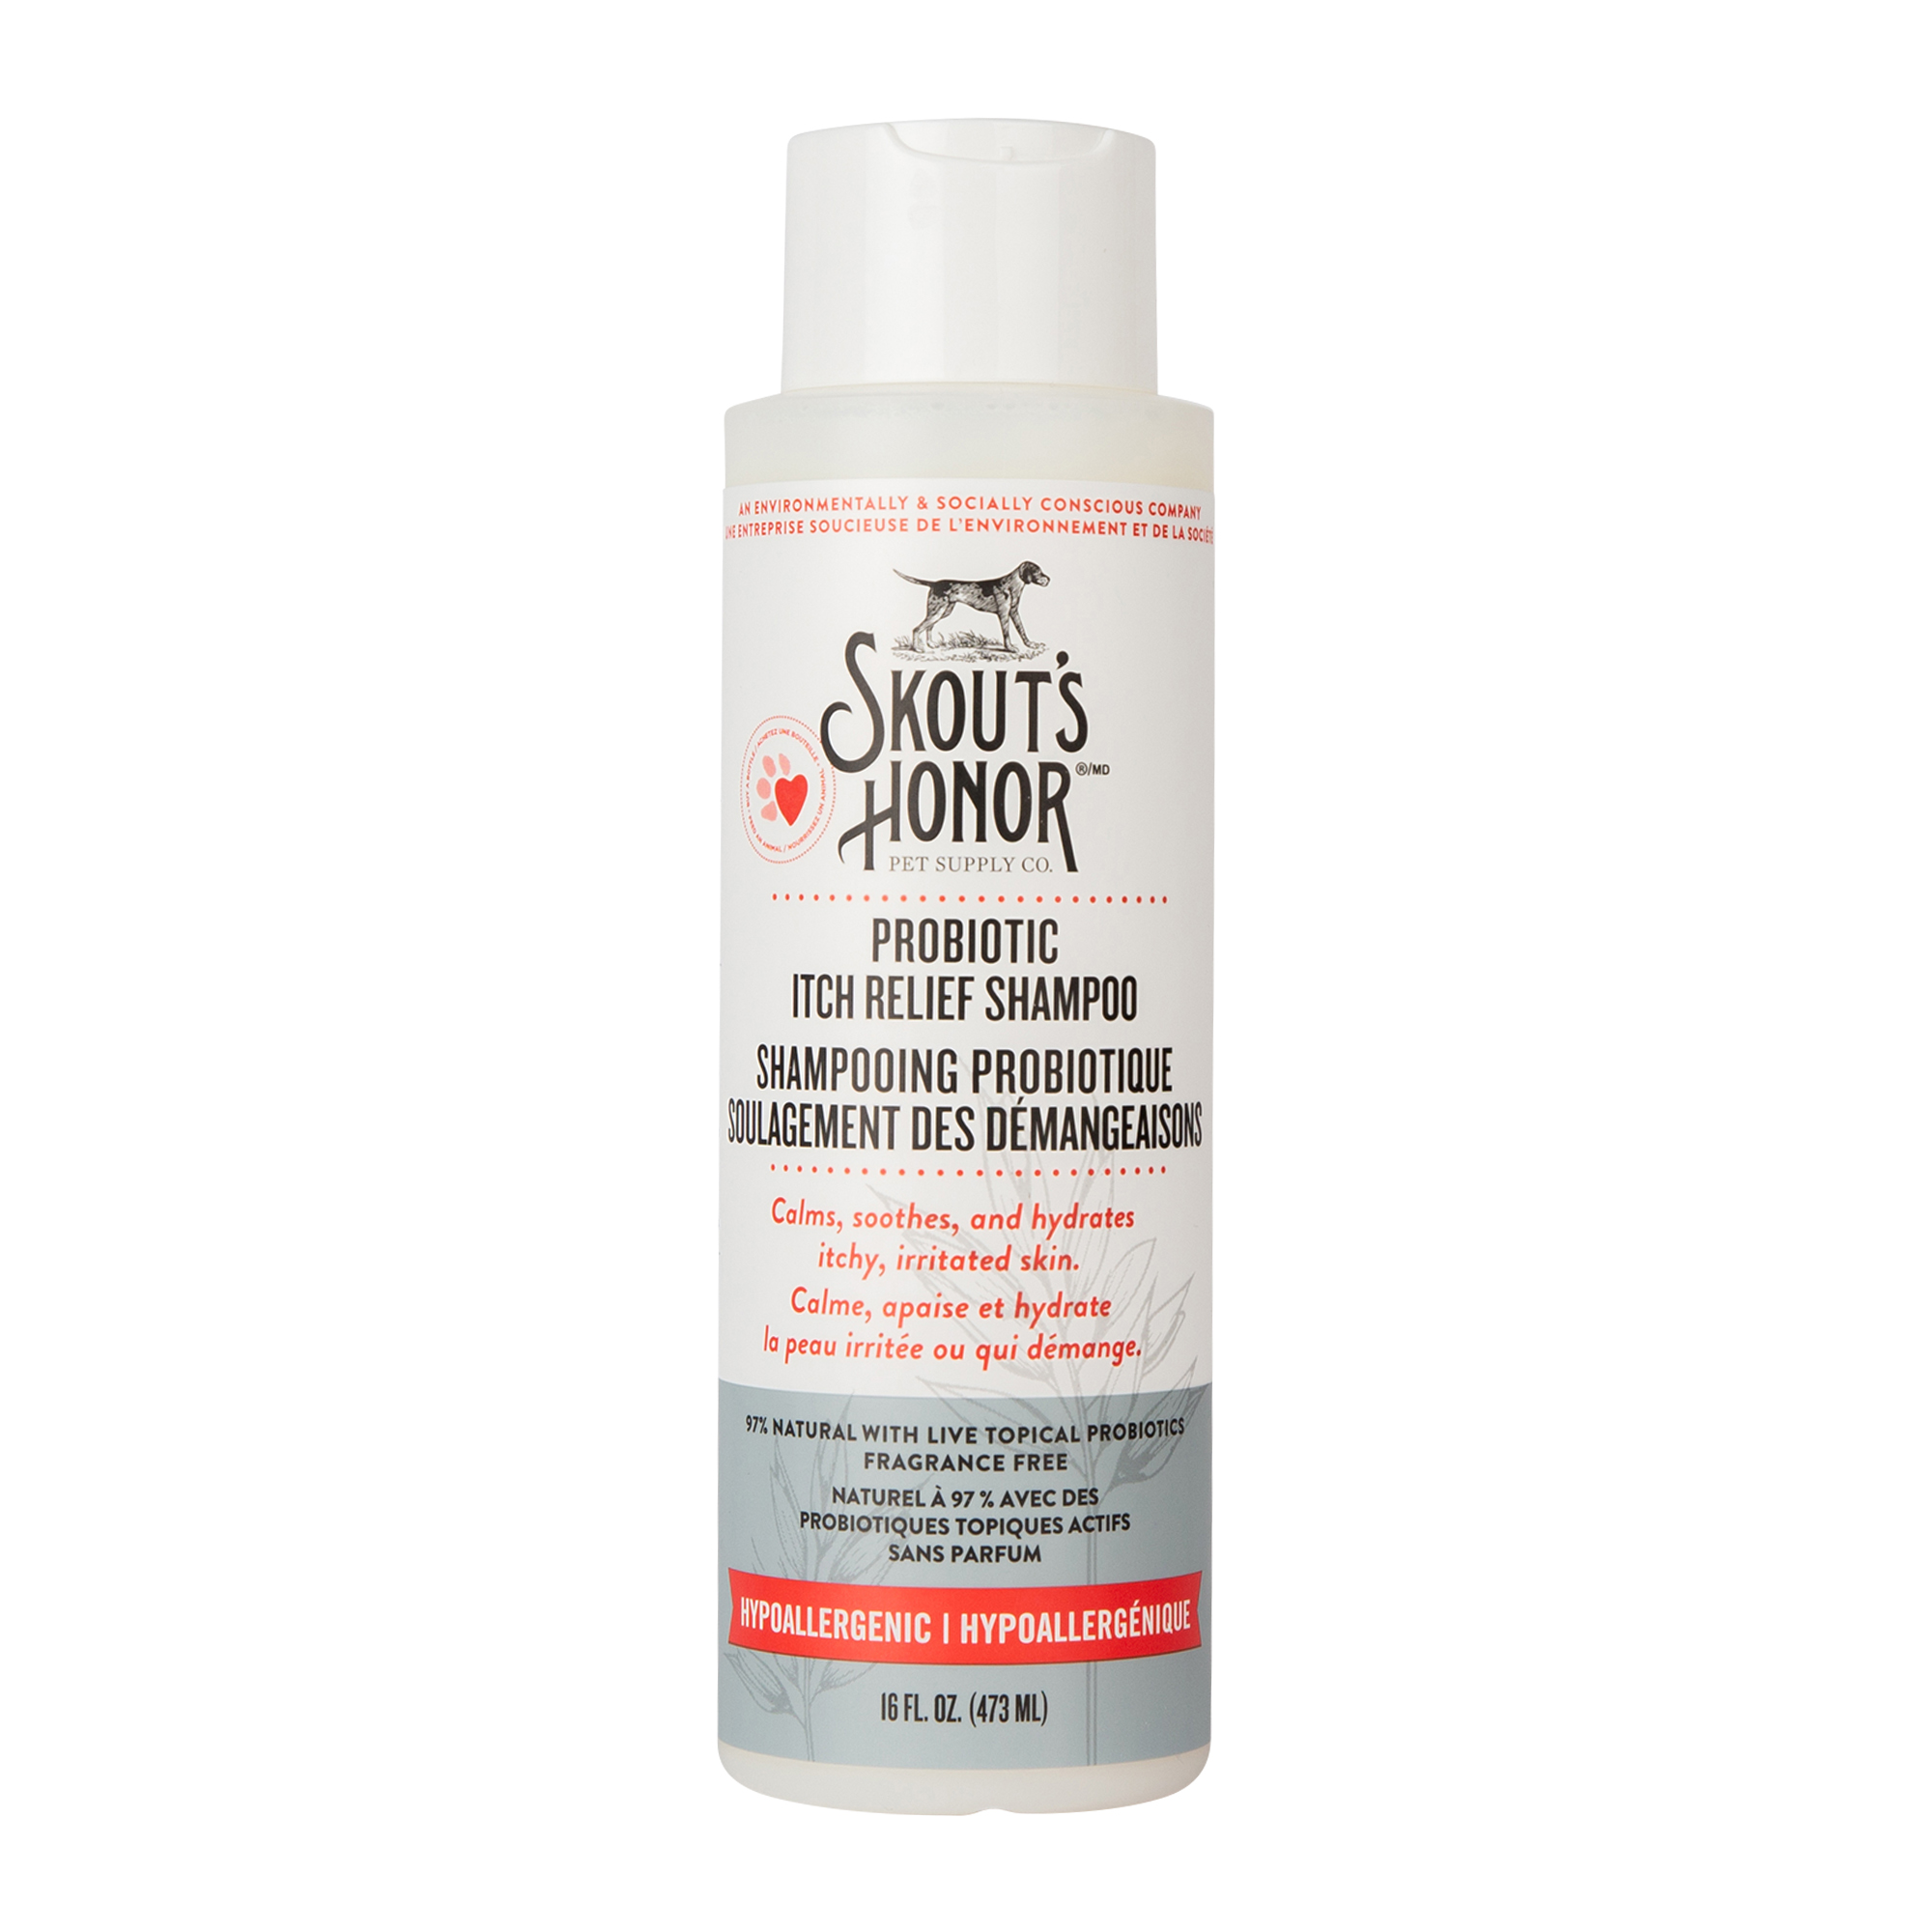 Probiotic Itch relief Shampoo